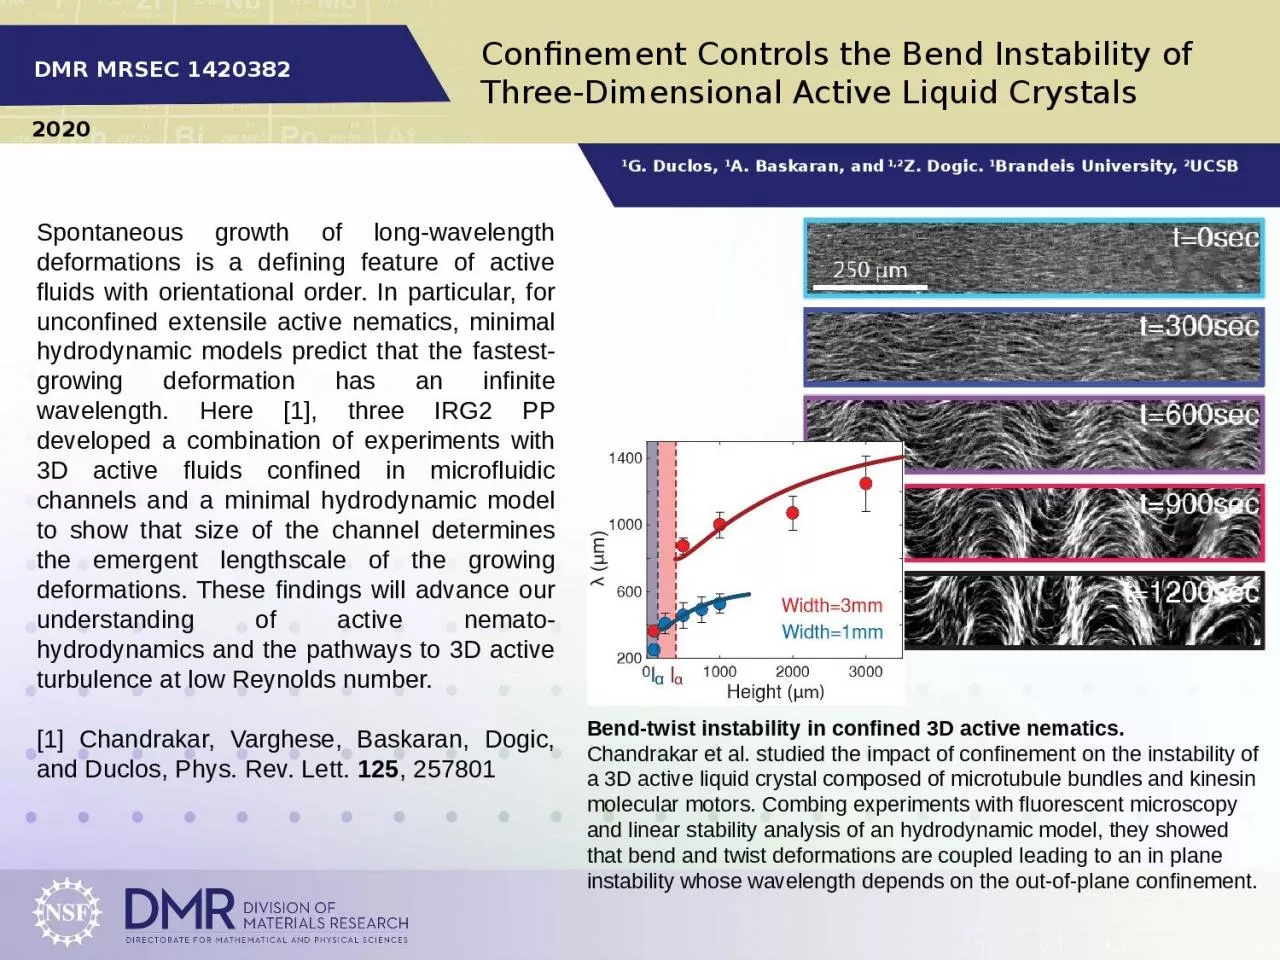 Confinement Controls the Bend Instability of Three-Dimensional Active Liquid Crystals